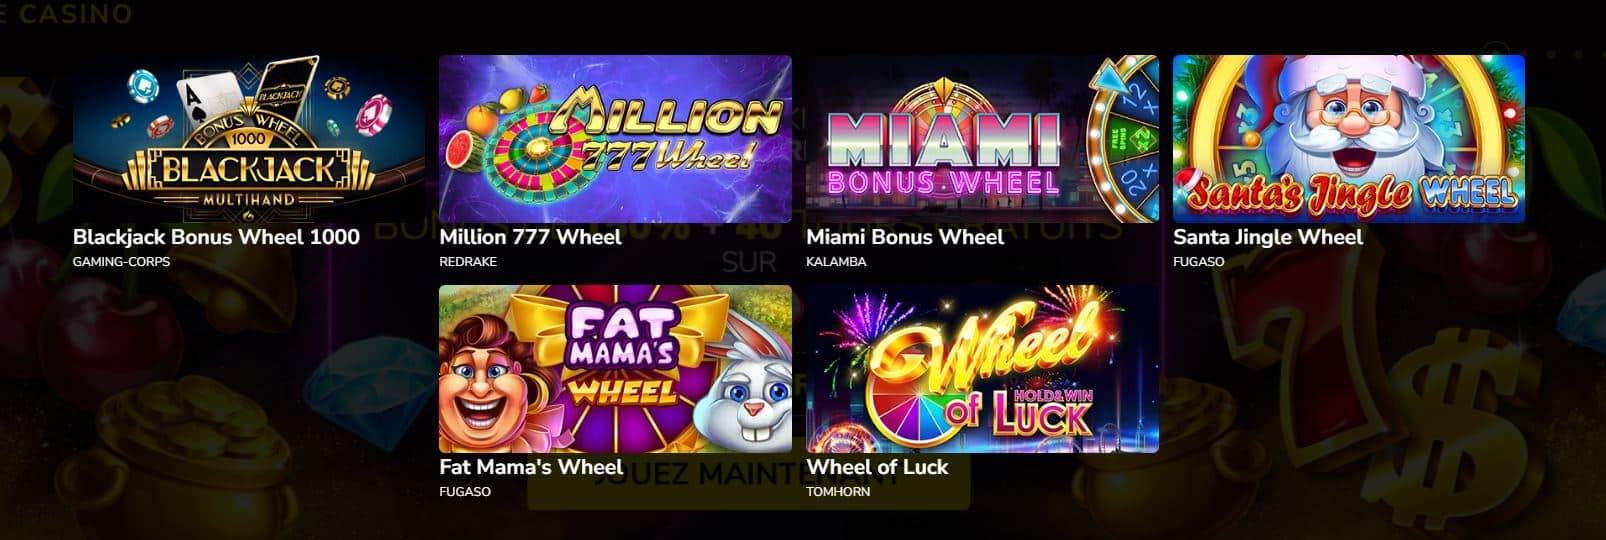 Kings Chance - Jeux Wheel of Fortune - Meilleur casino Wheel of Fortune